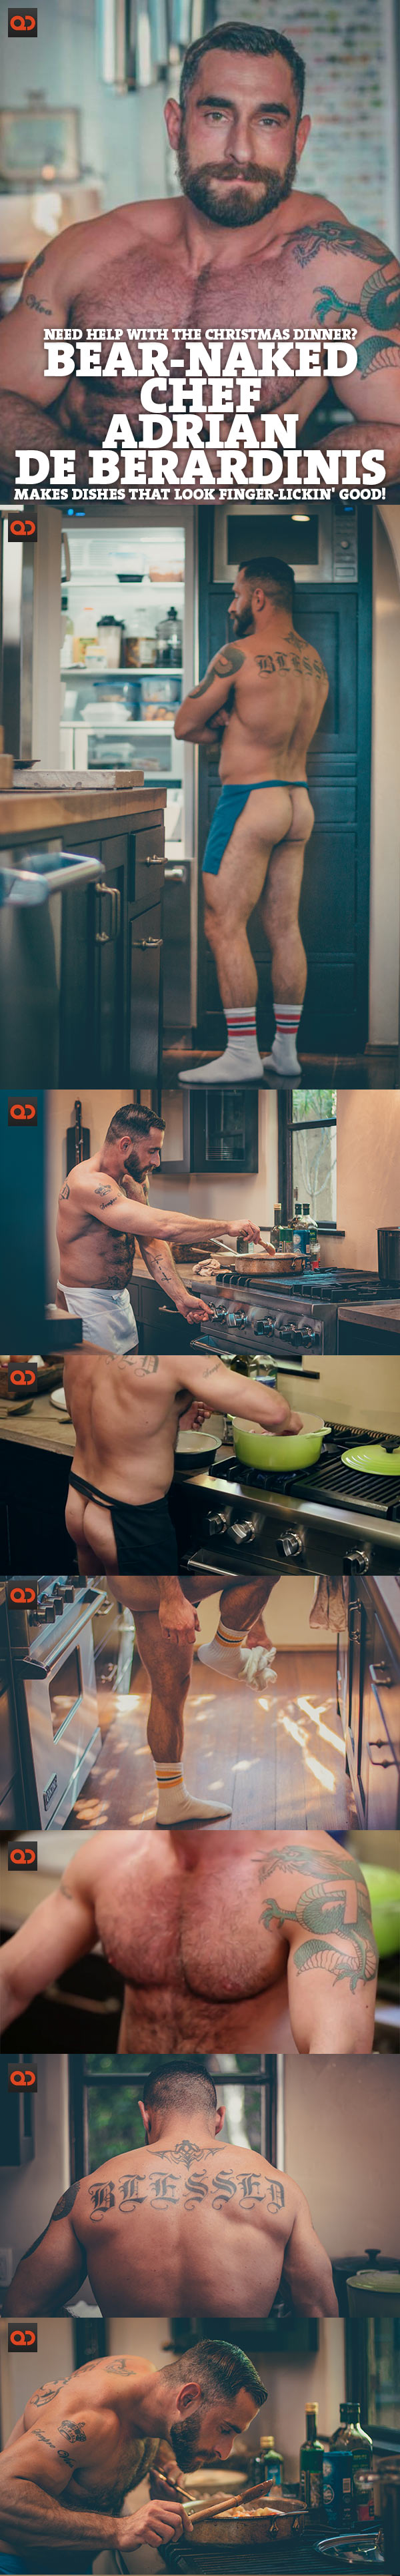 Need Help With The Christmas Dinner? Bear-Naked Chef Adrian De Berardinis Makes Dishes That Look Finger-Lickin' Good!